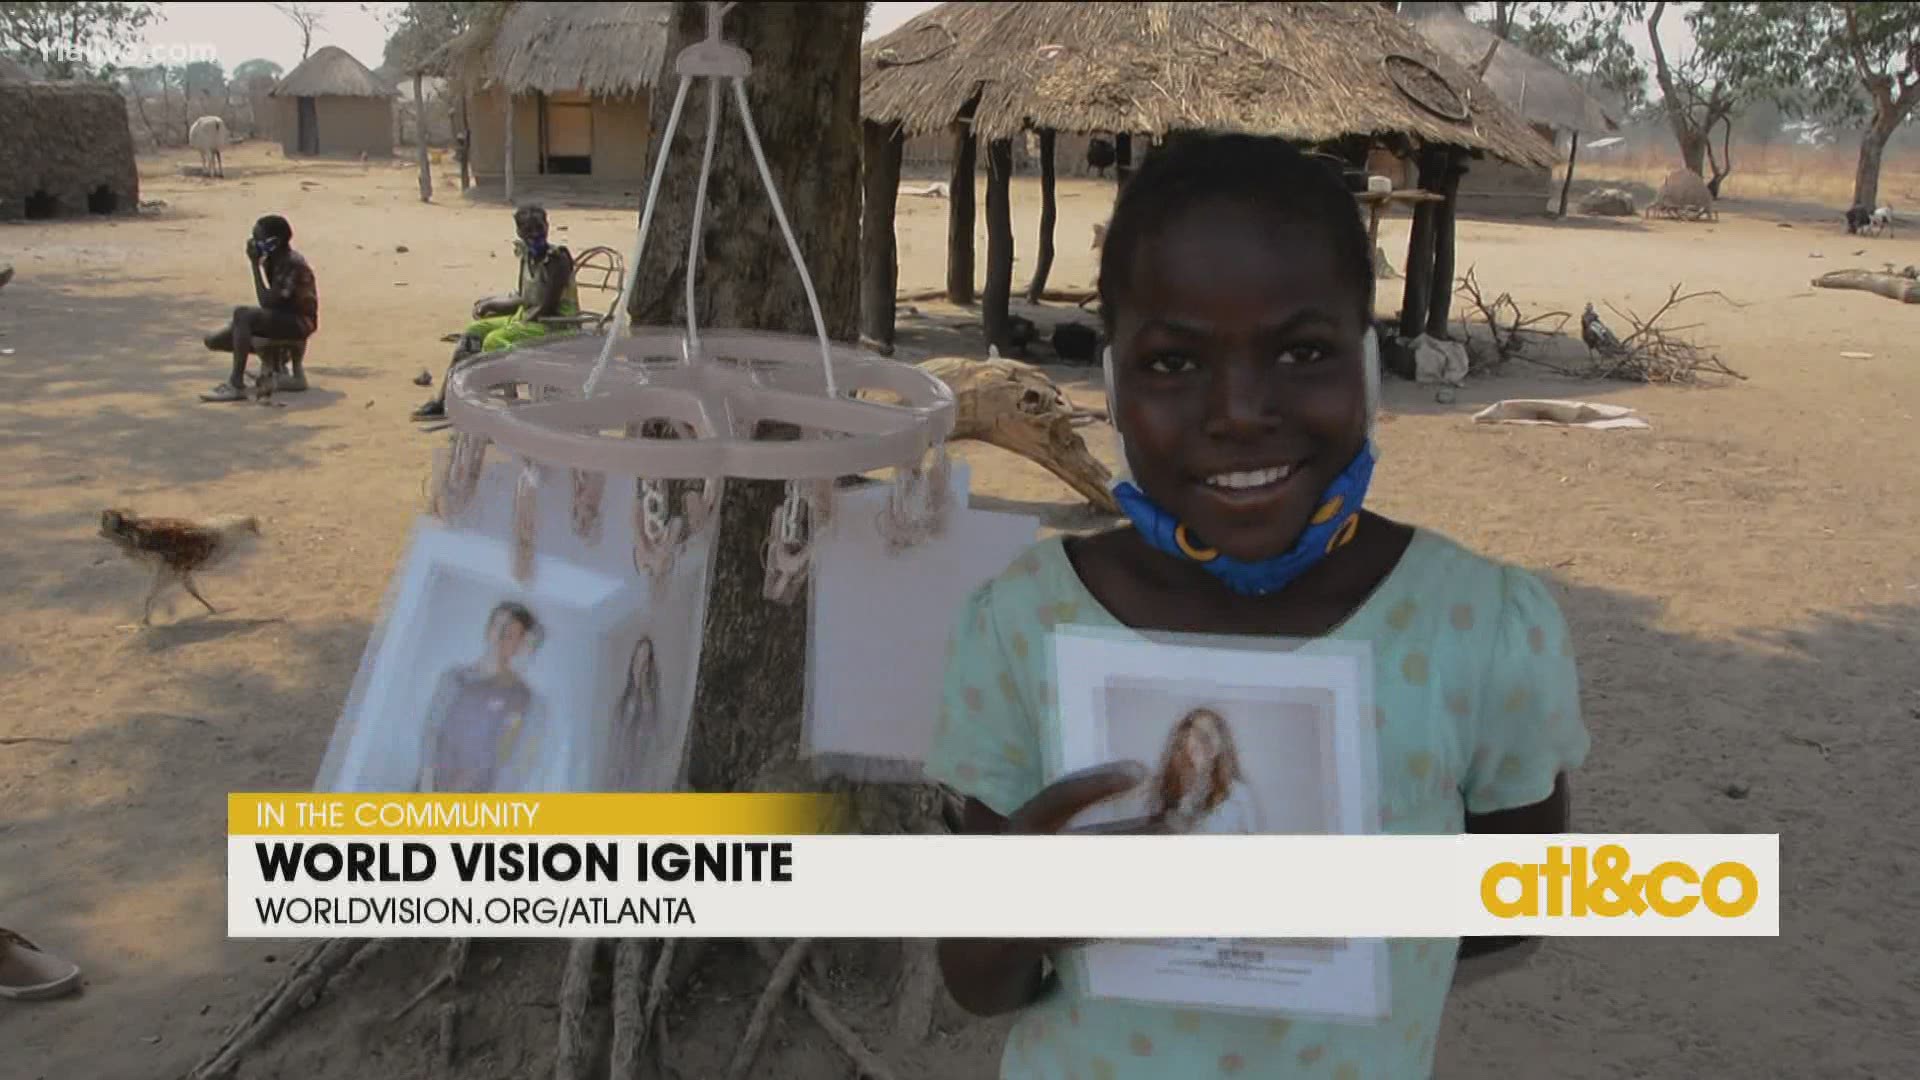 Shaping our future leaders! World Vision Ignite is transformative experiential learning, designed to help students become global leaders with a Biblical worldview.